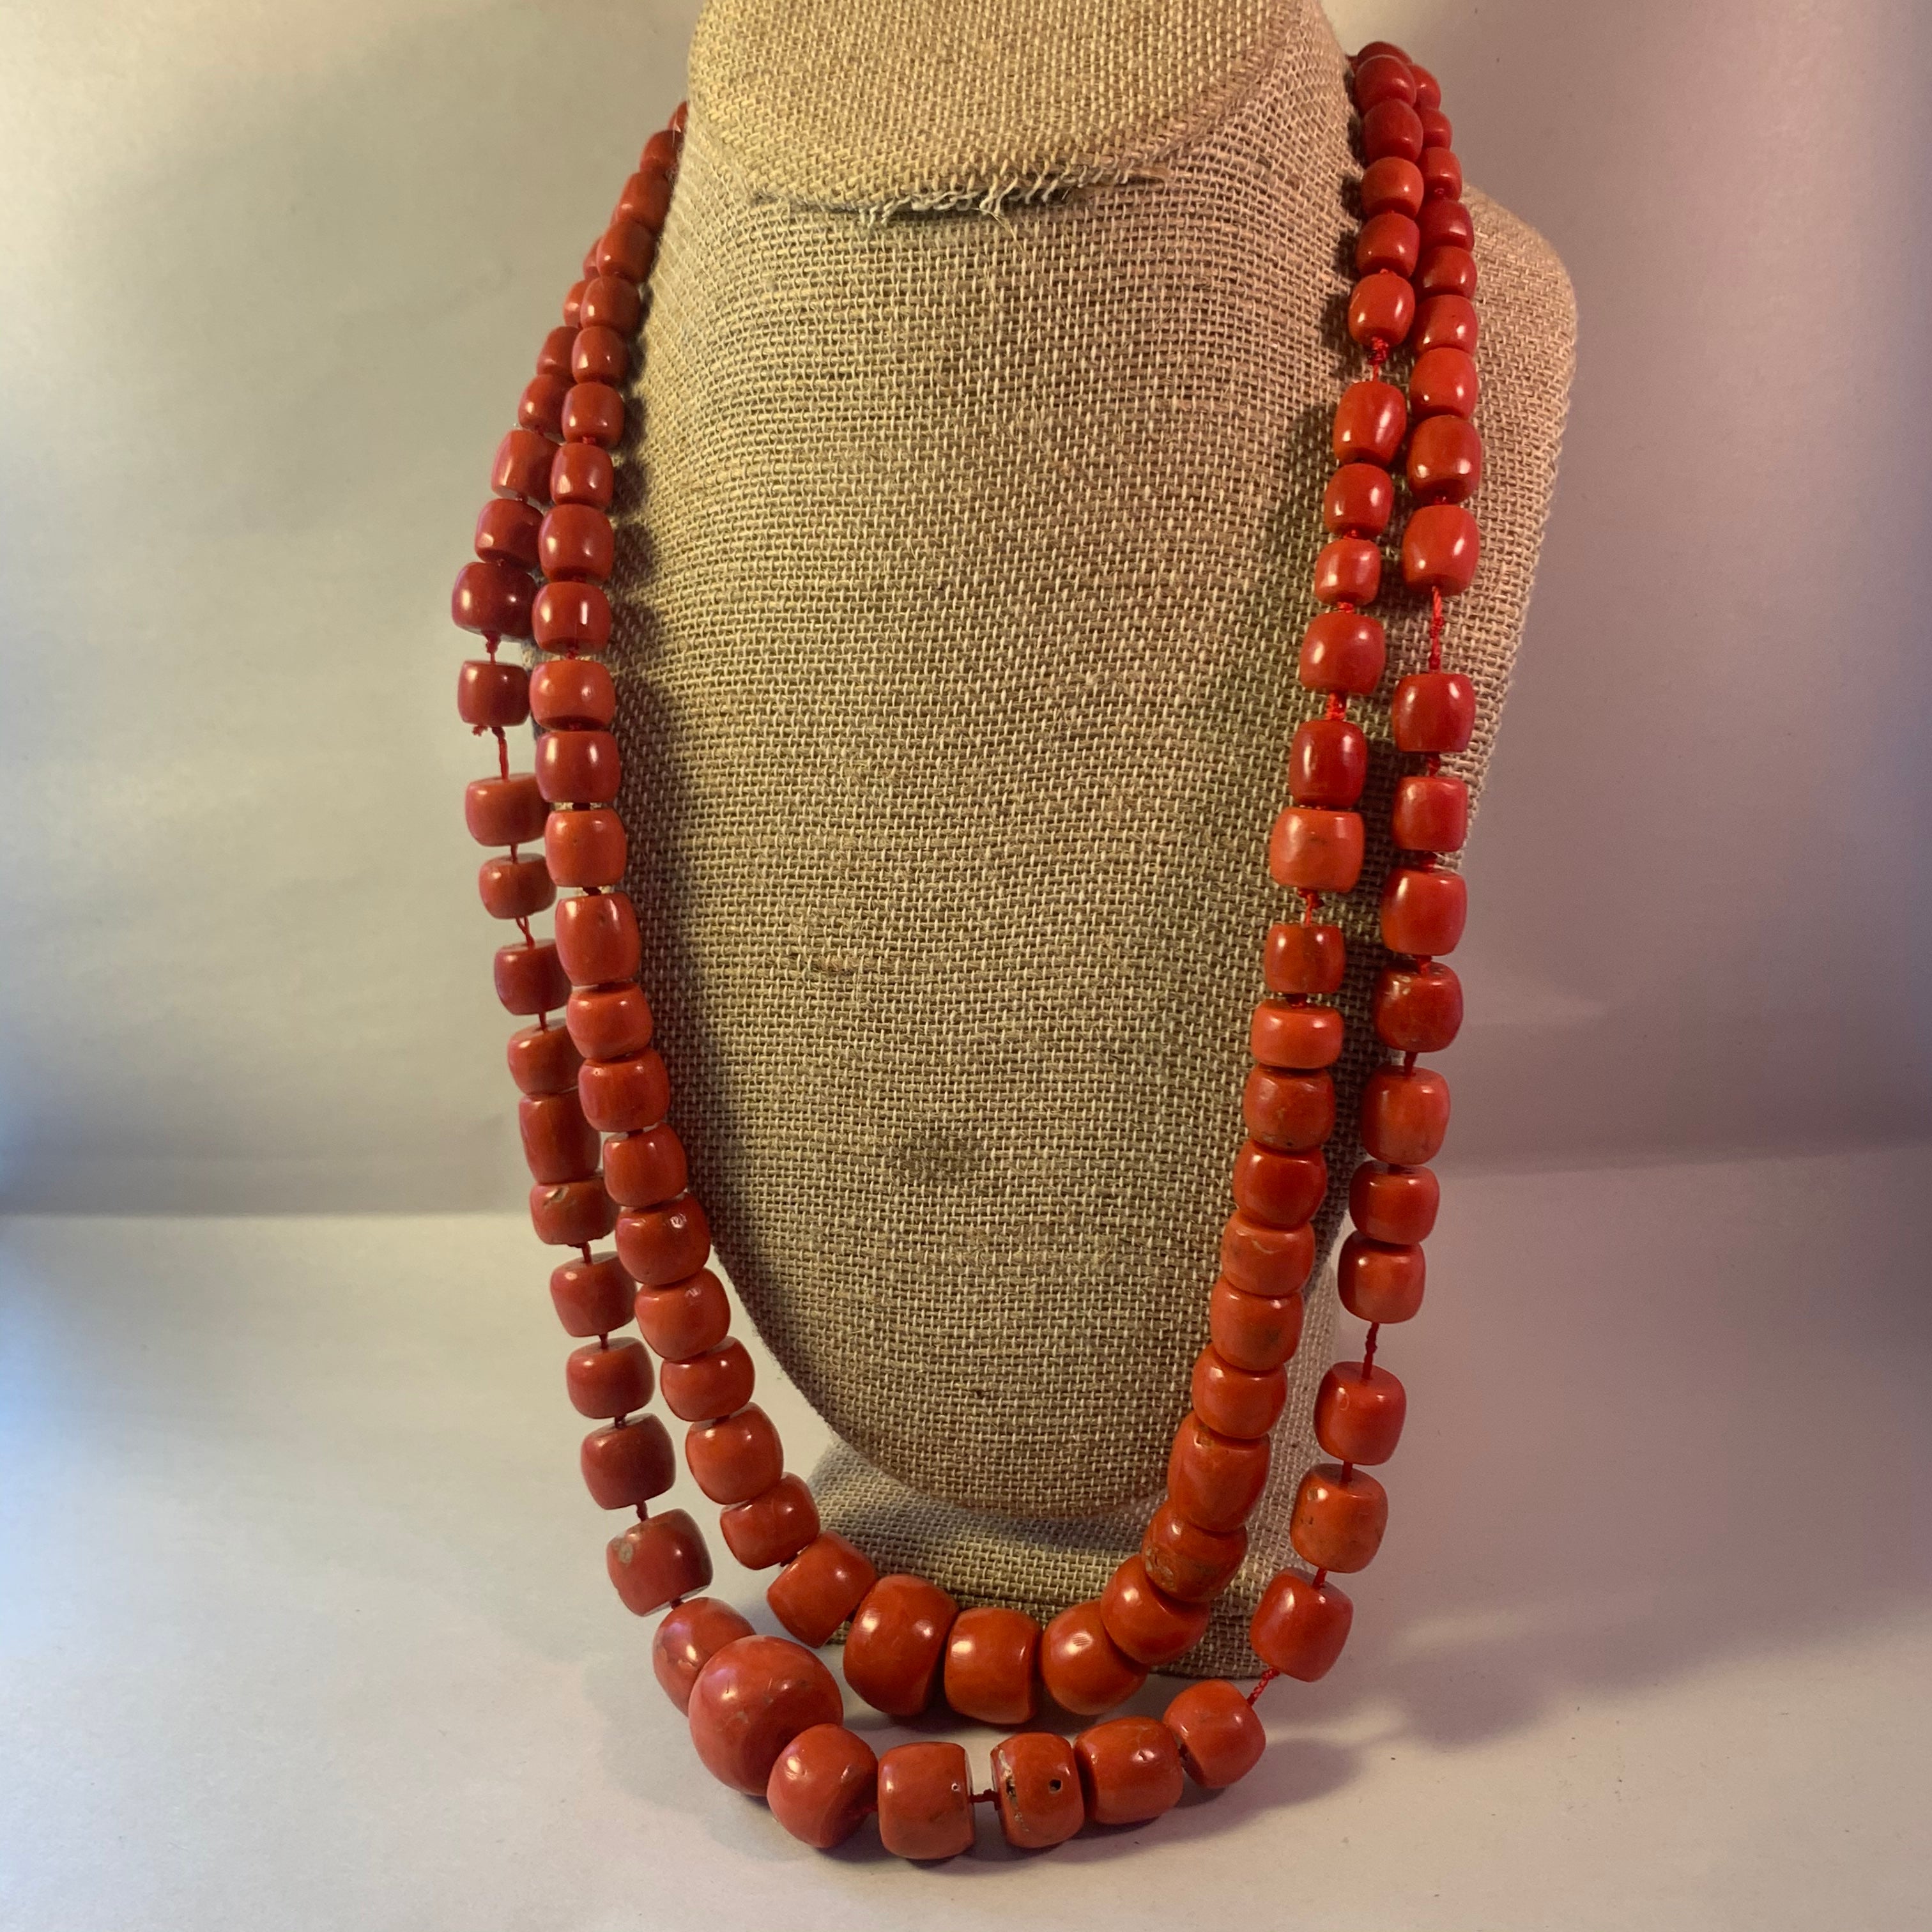 coral bead necklace|multi stand coral bead necklace|estate jewelry|Coral  beads|Coral necklace|Natural coral beads|red coral necklace